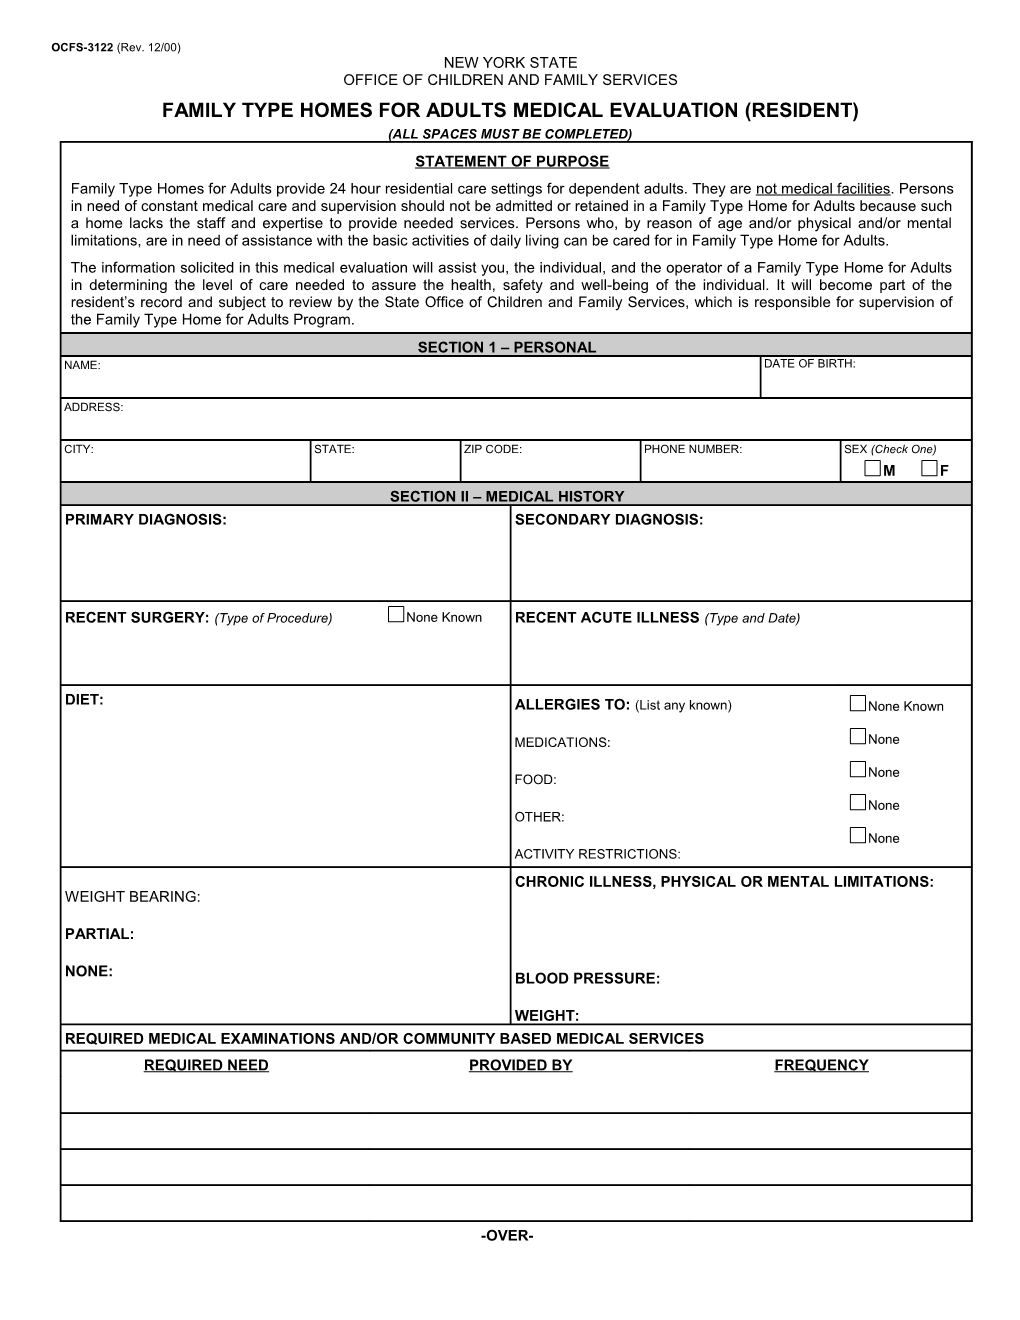 OCFS-3122 Family Type Homes for Adults - Medical Evaluation (Resident)